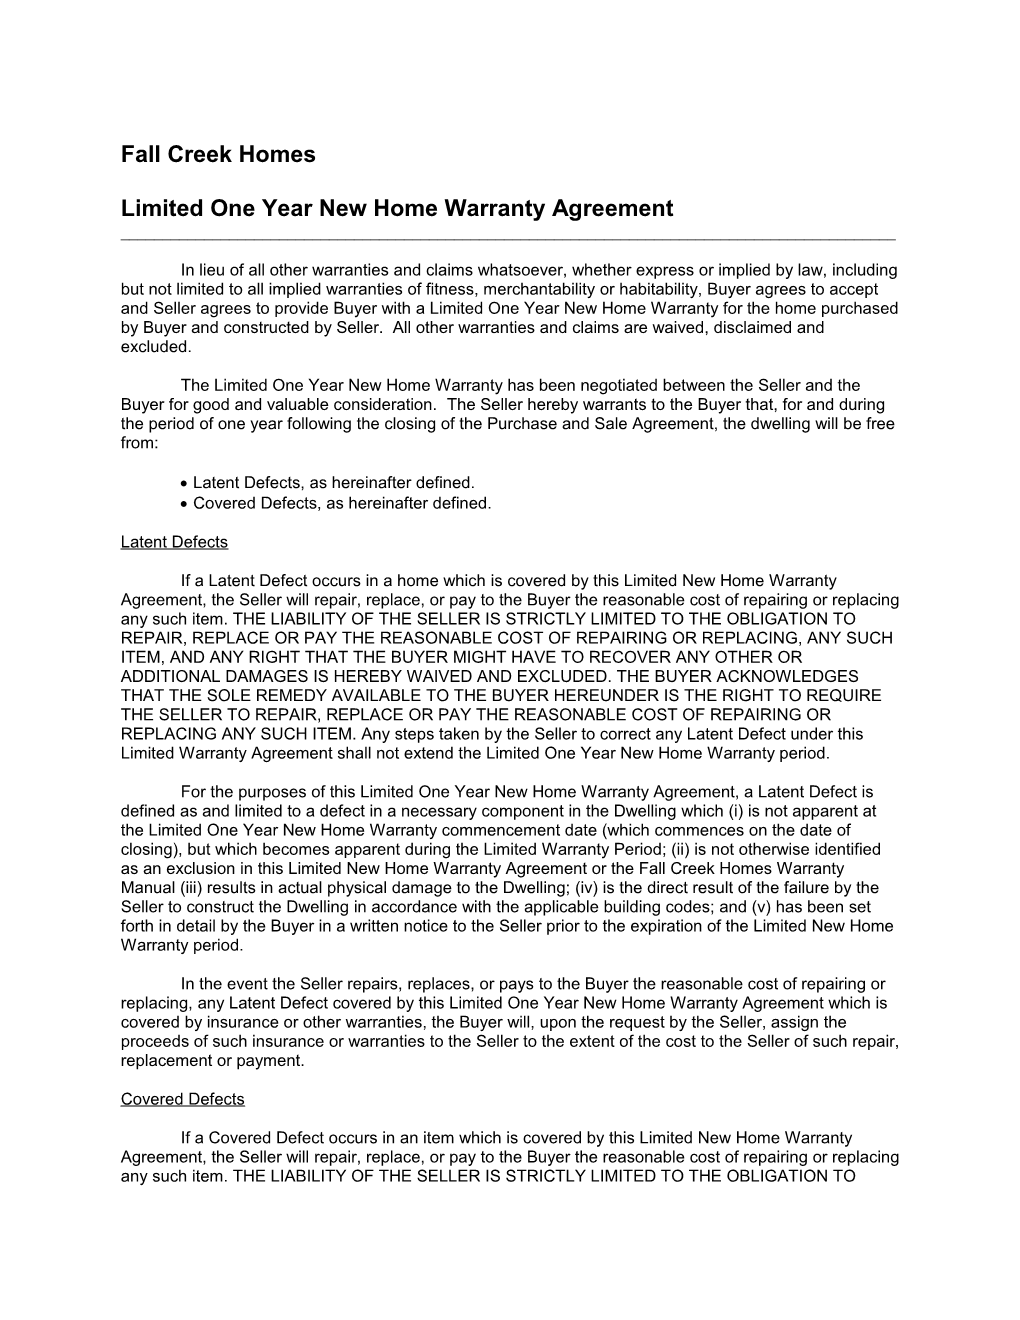 Limited One Year New Home Warranty Agreement